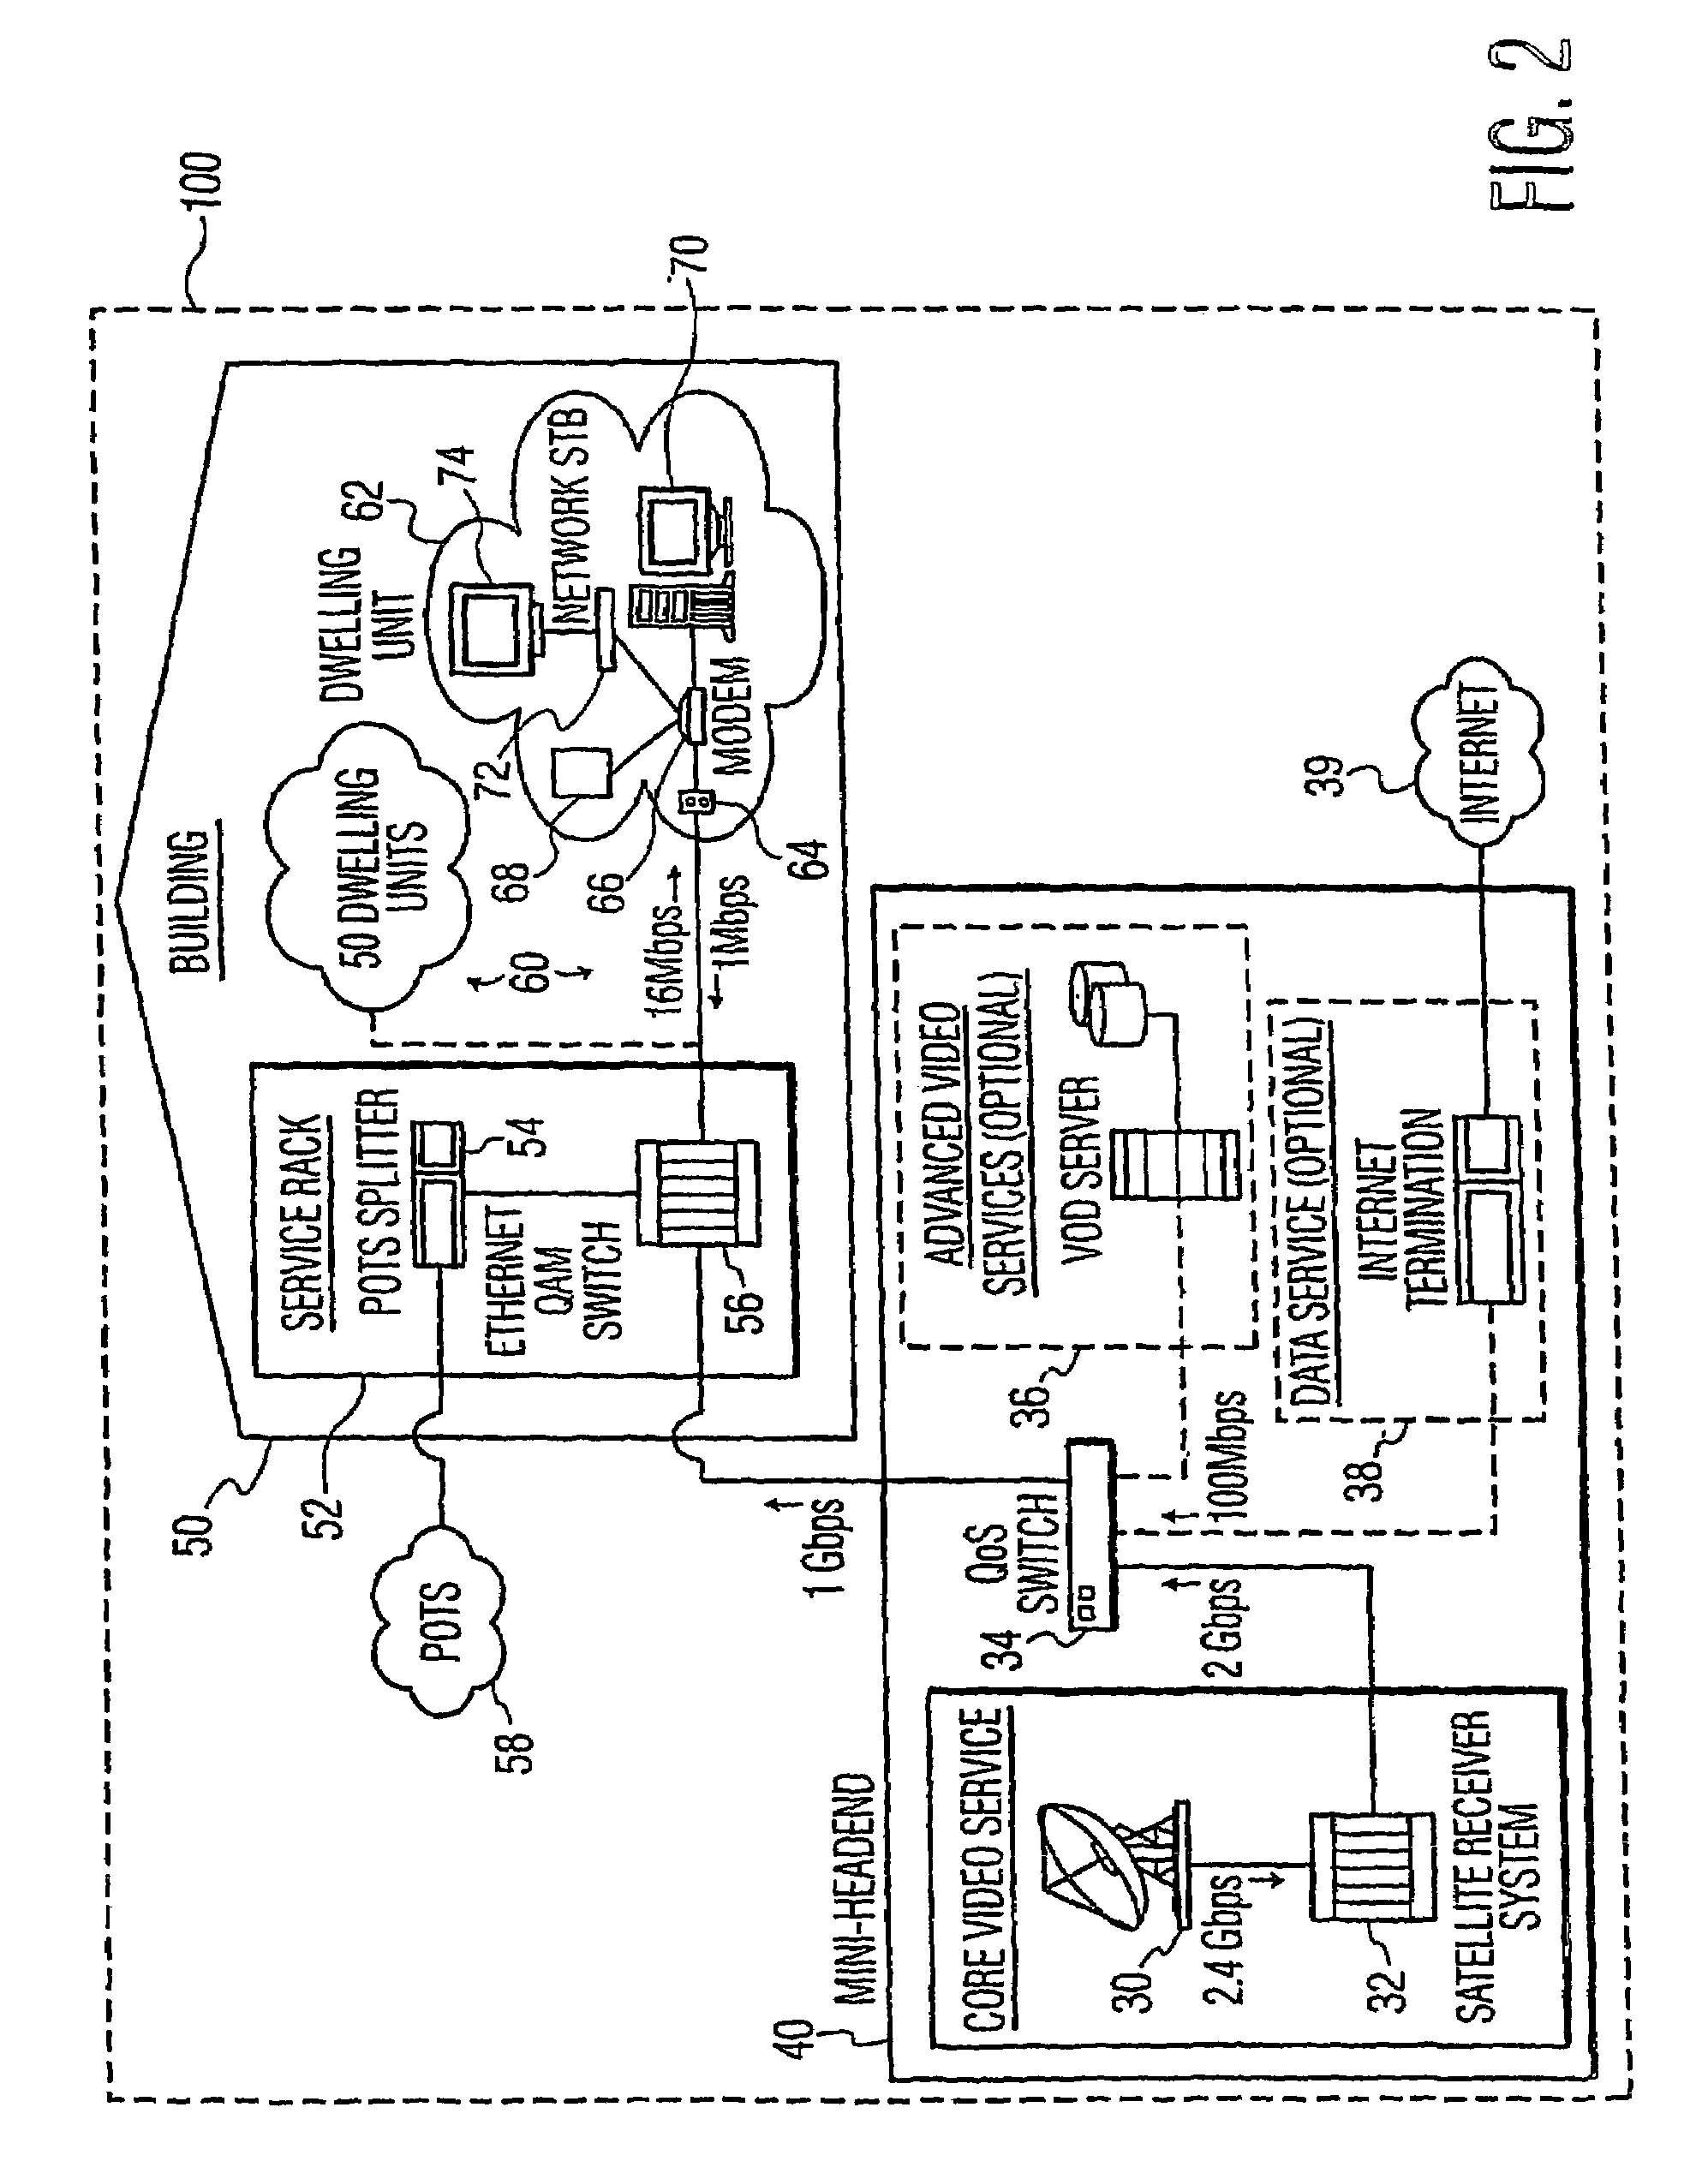 System and method for utilizing multicast IP and ethernet to locate and distribute a satellite signal